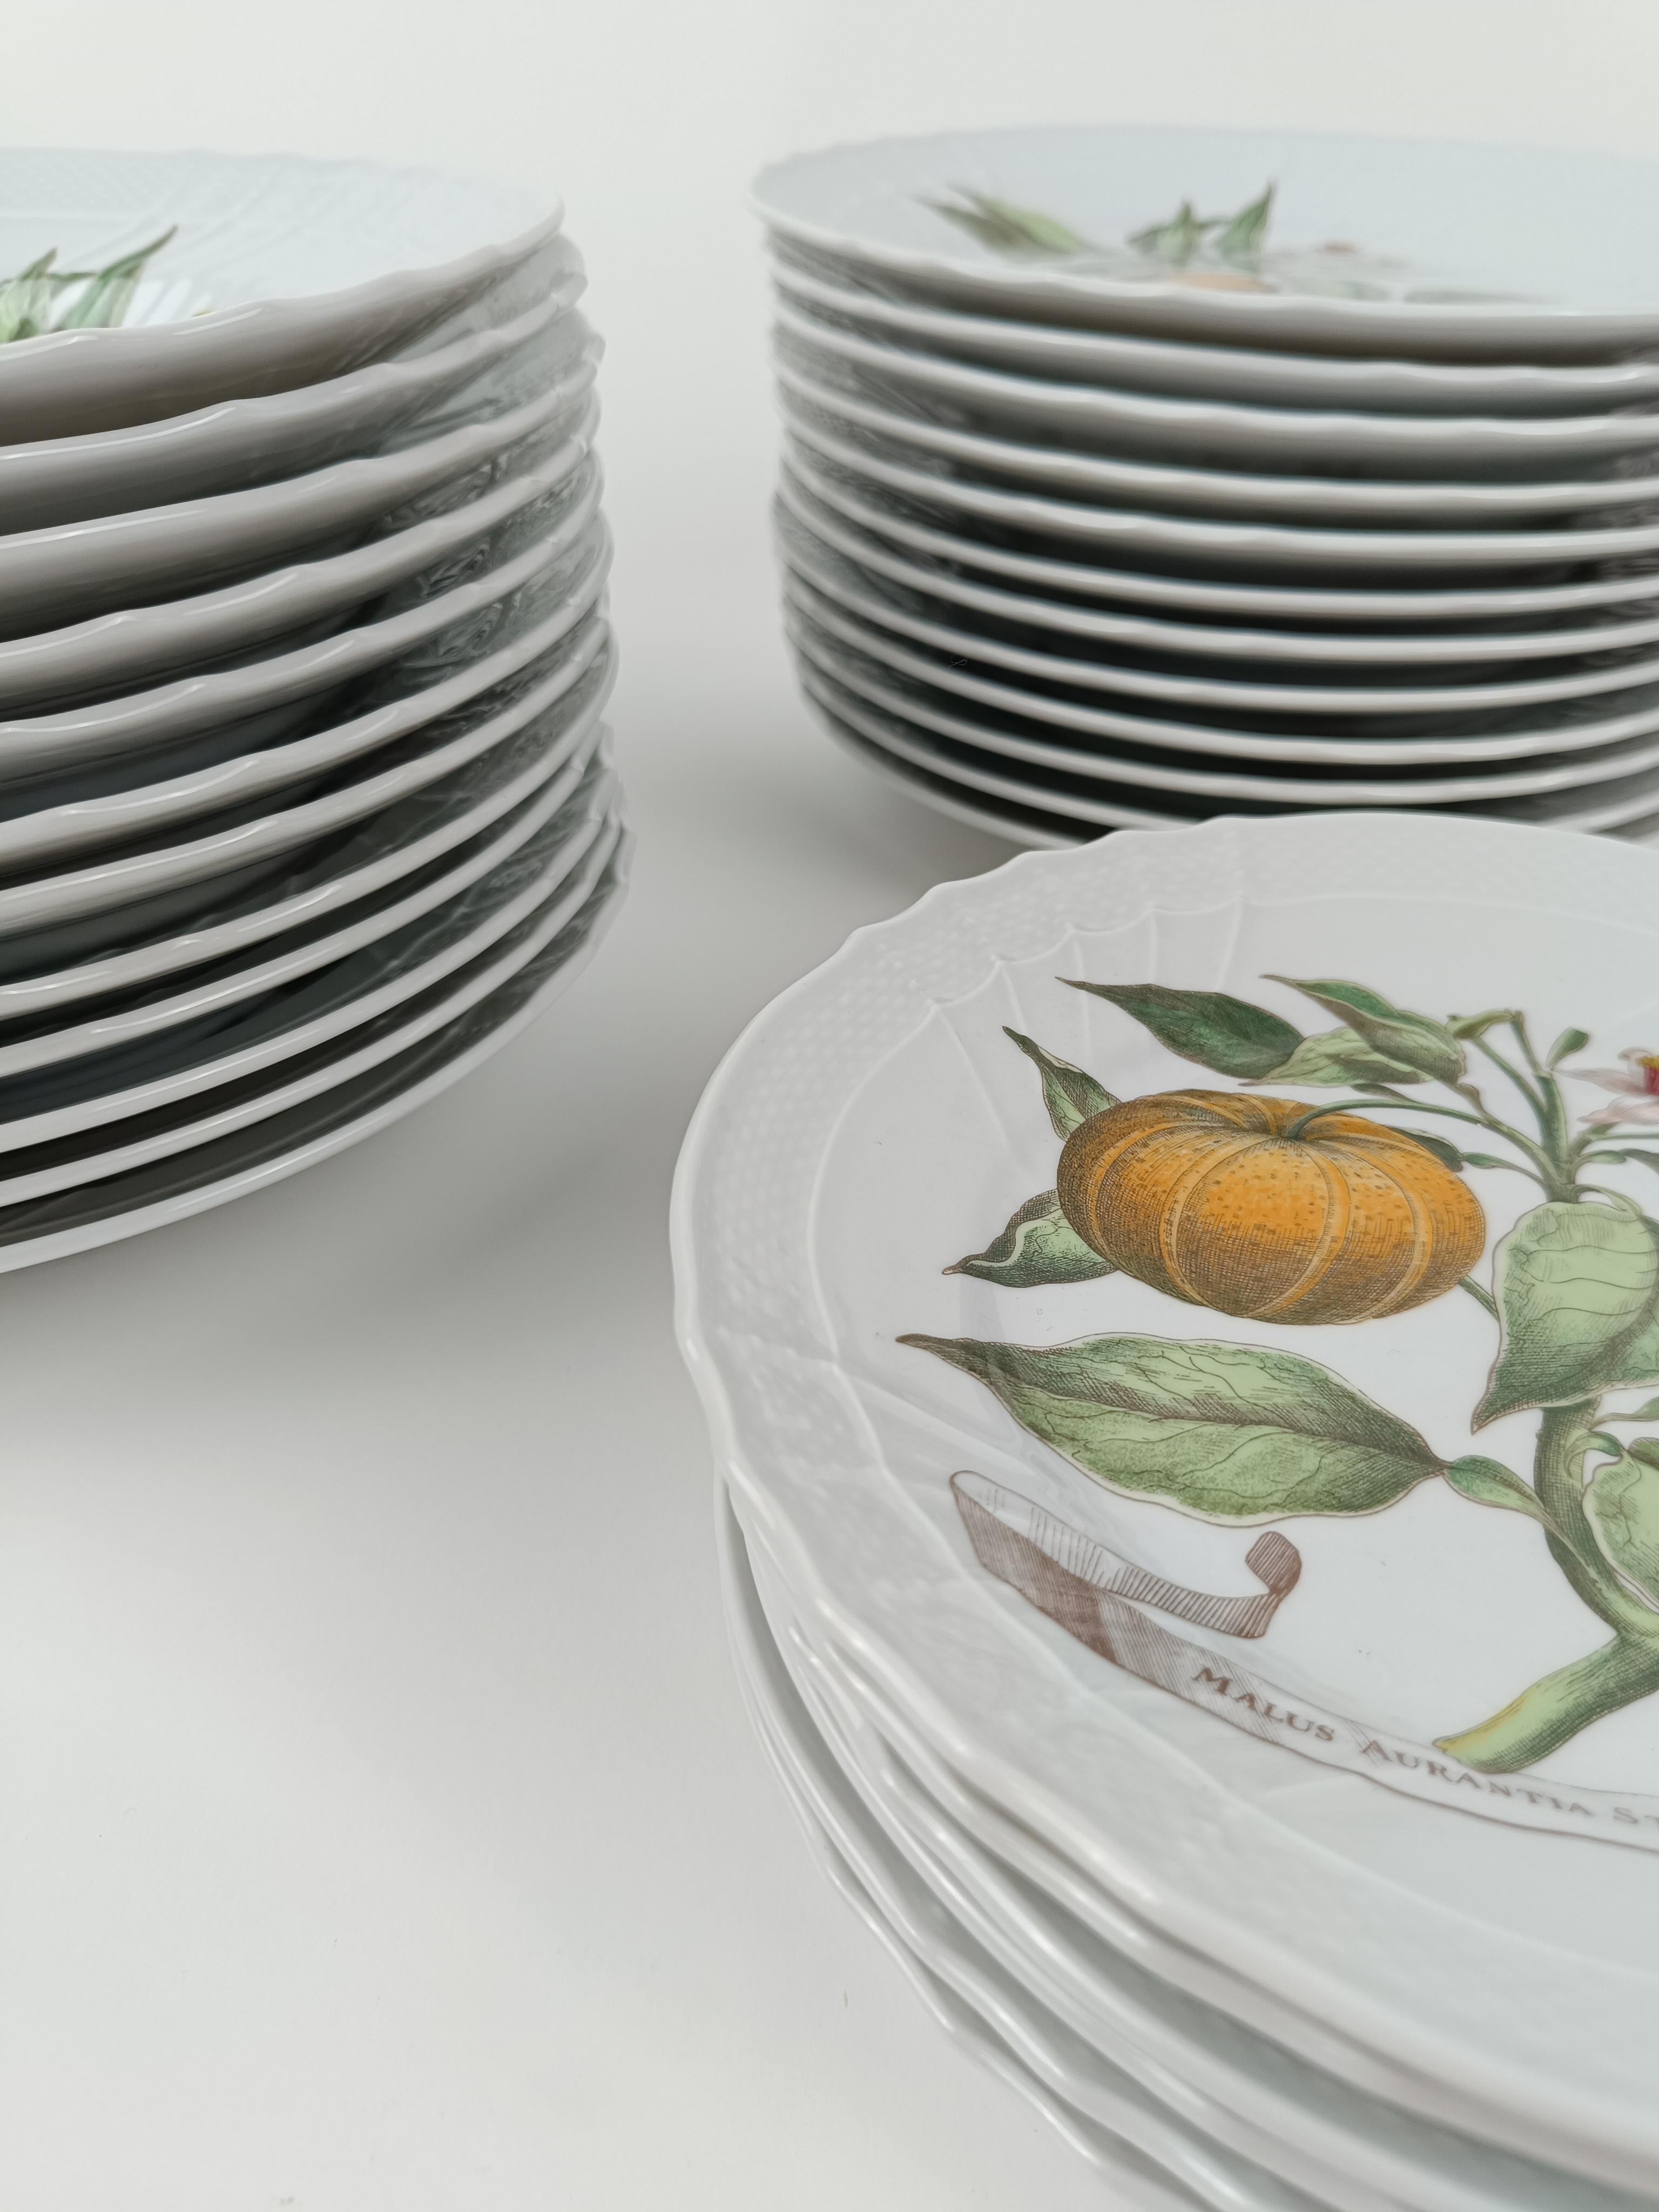 Richard Ginori China Dinner Service with a botanical print by Munting Abraham For Sale 7